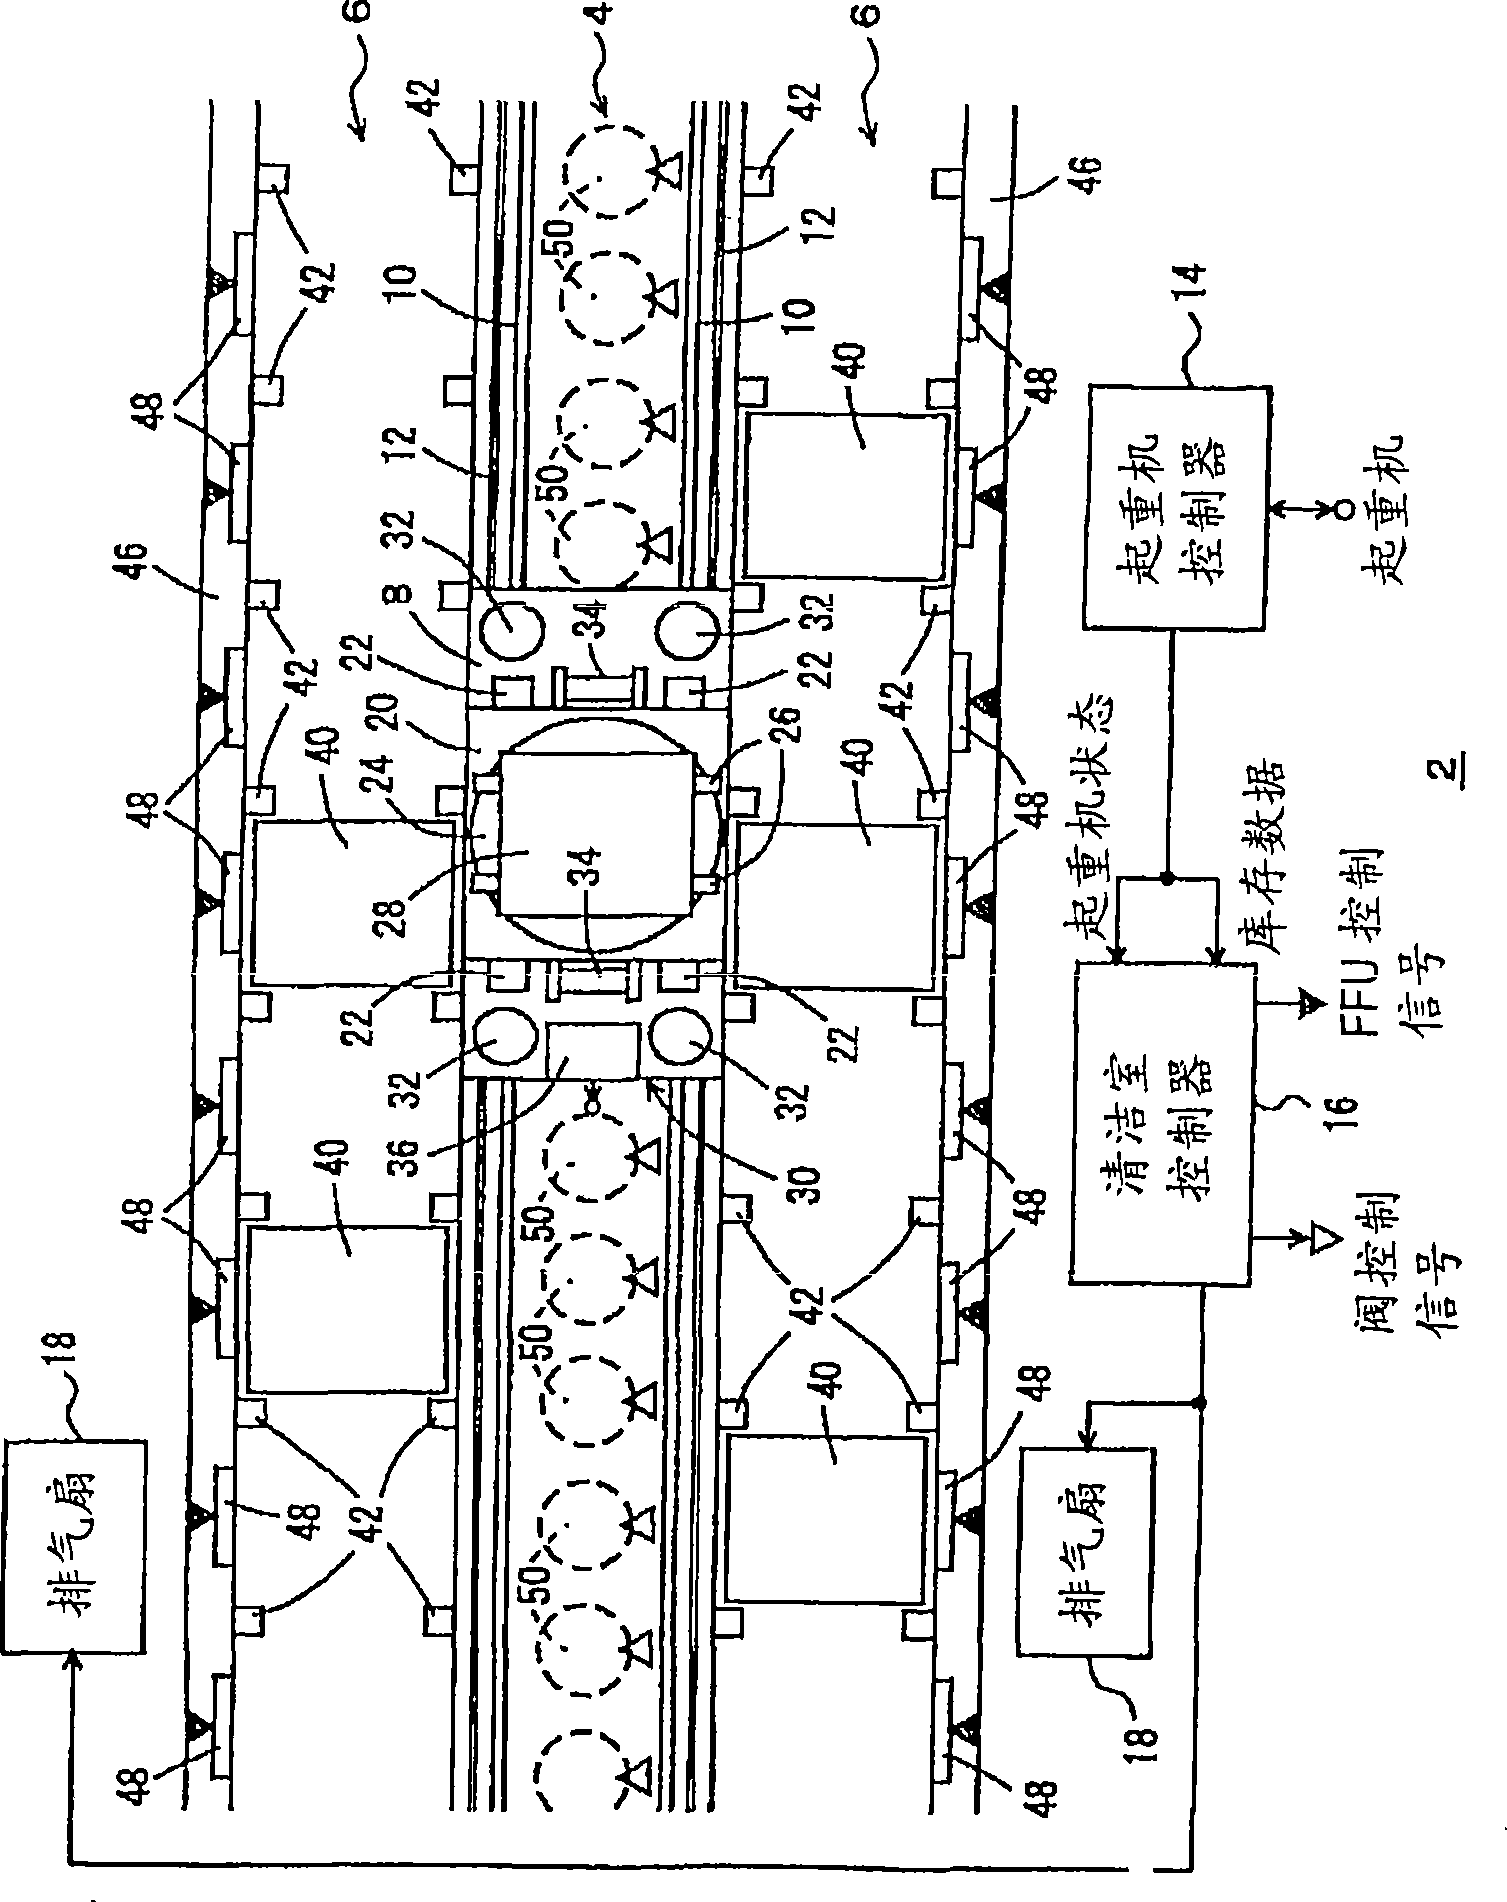 Automated warehouse and method of supplying clean air to the automated warehouse